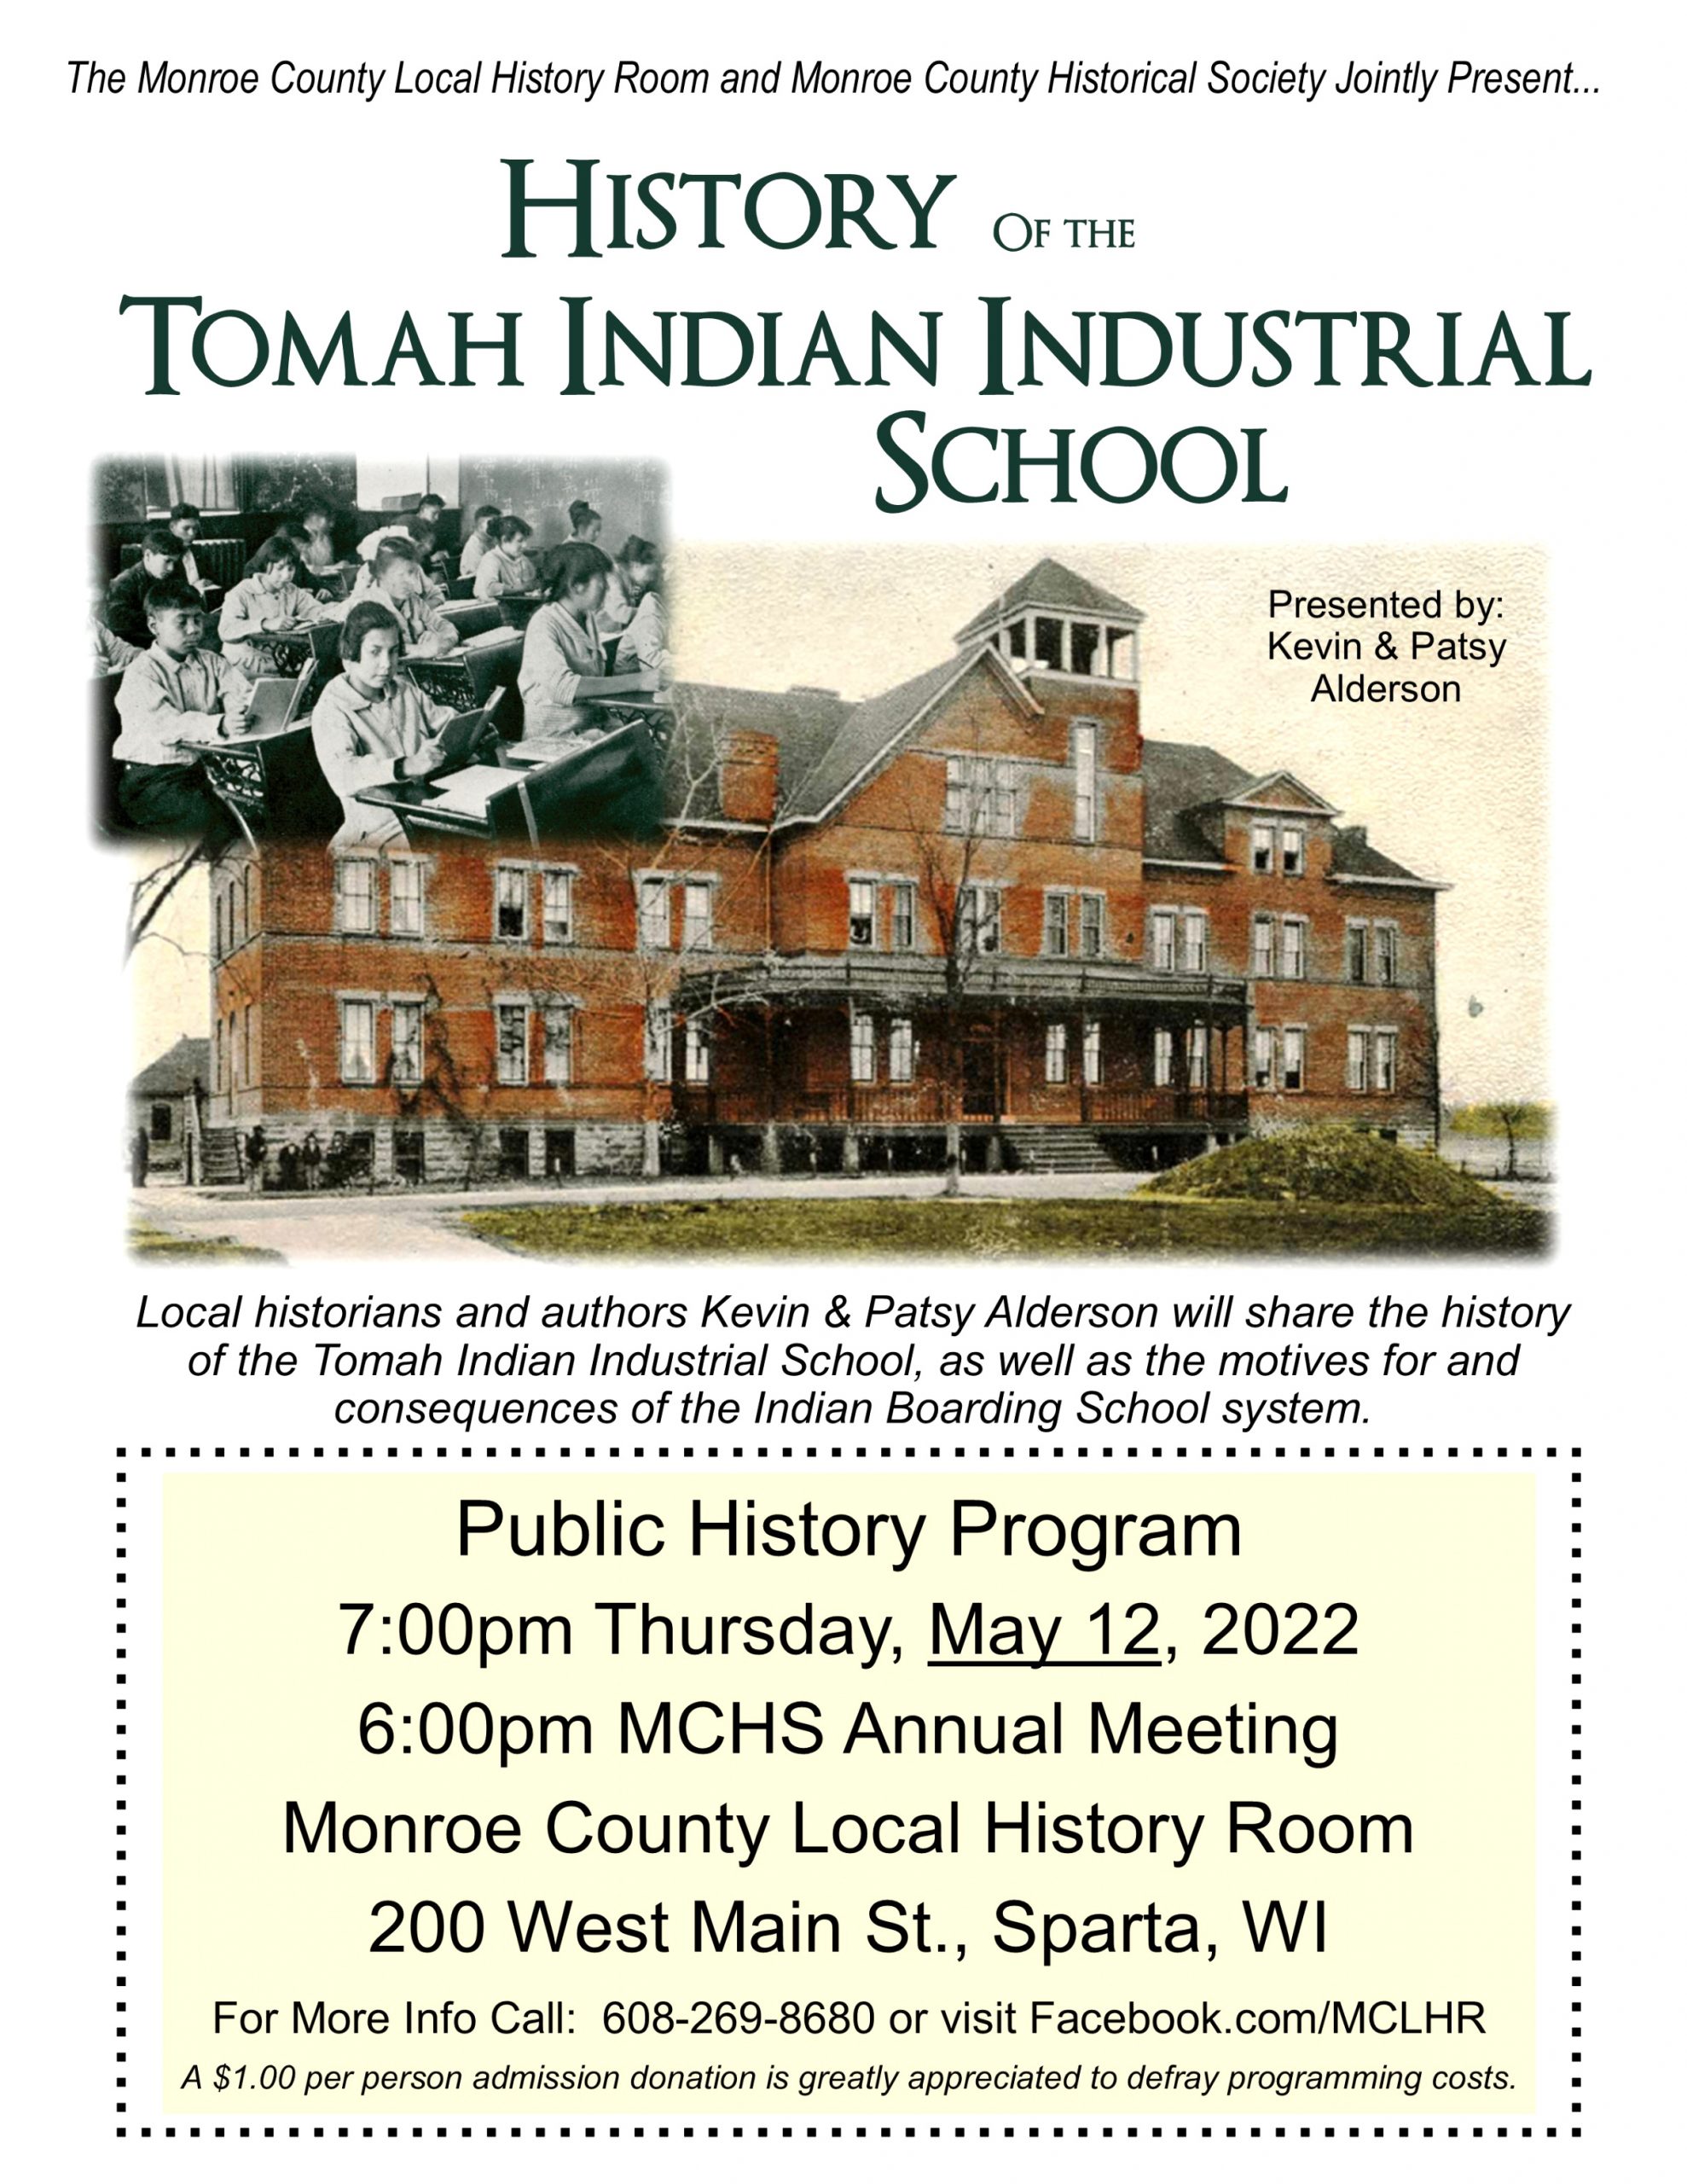 Small Business software In Juneau Wi Dans Monroe County Local History Museum: the Best Website to Research ...